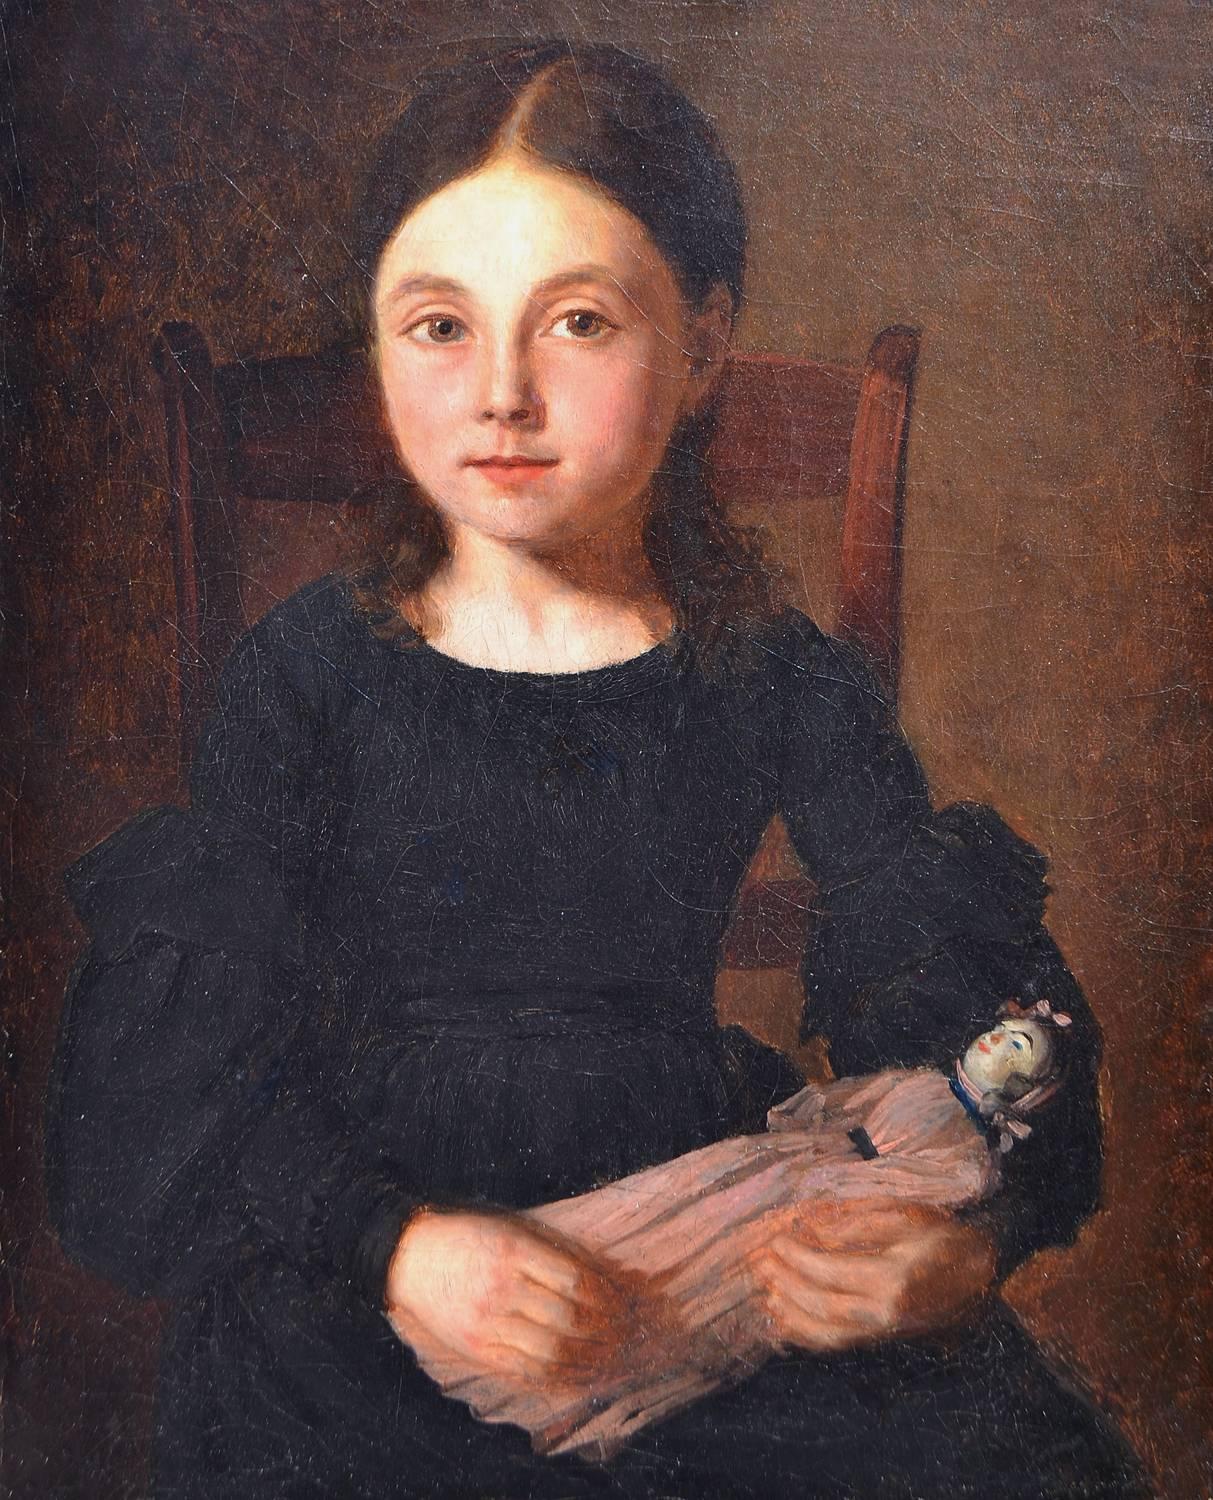 Unknown Portrait Painting - The New Doll